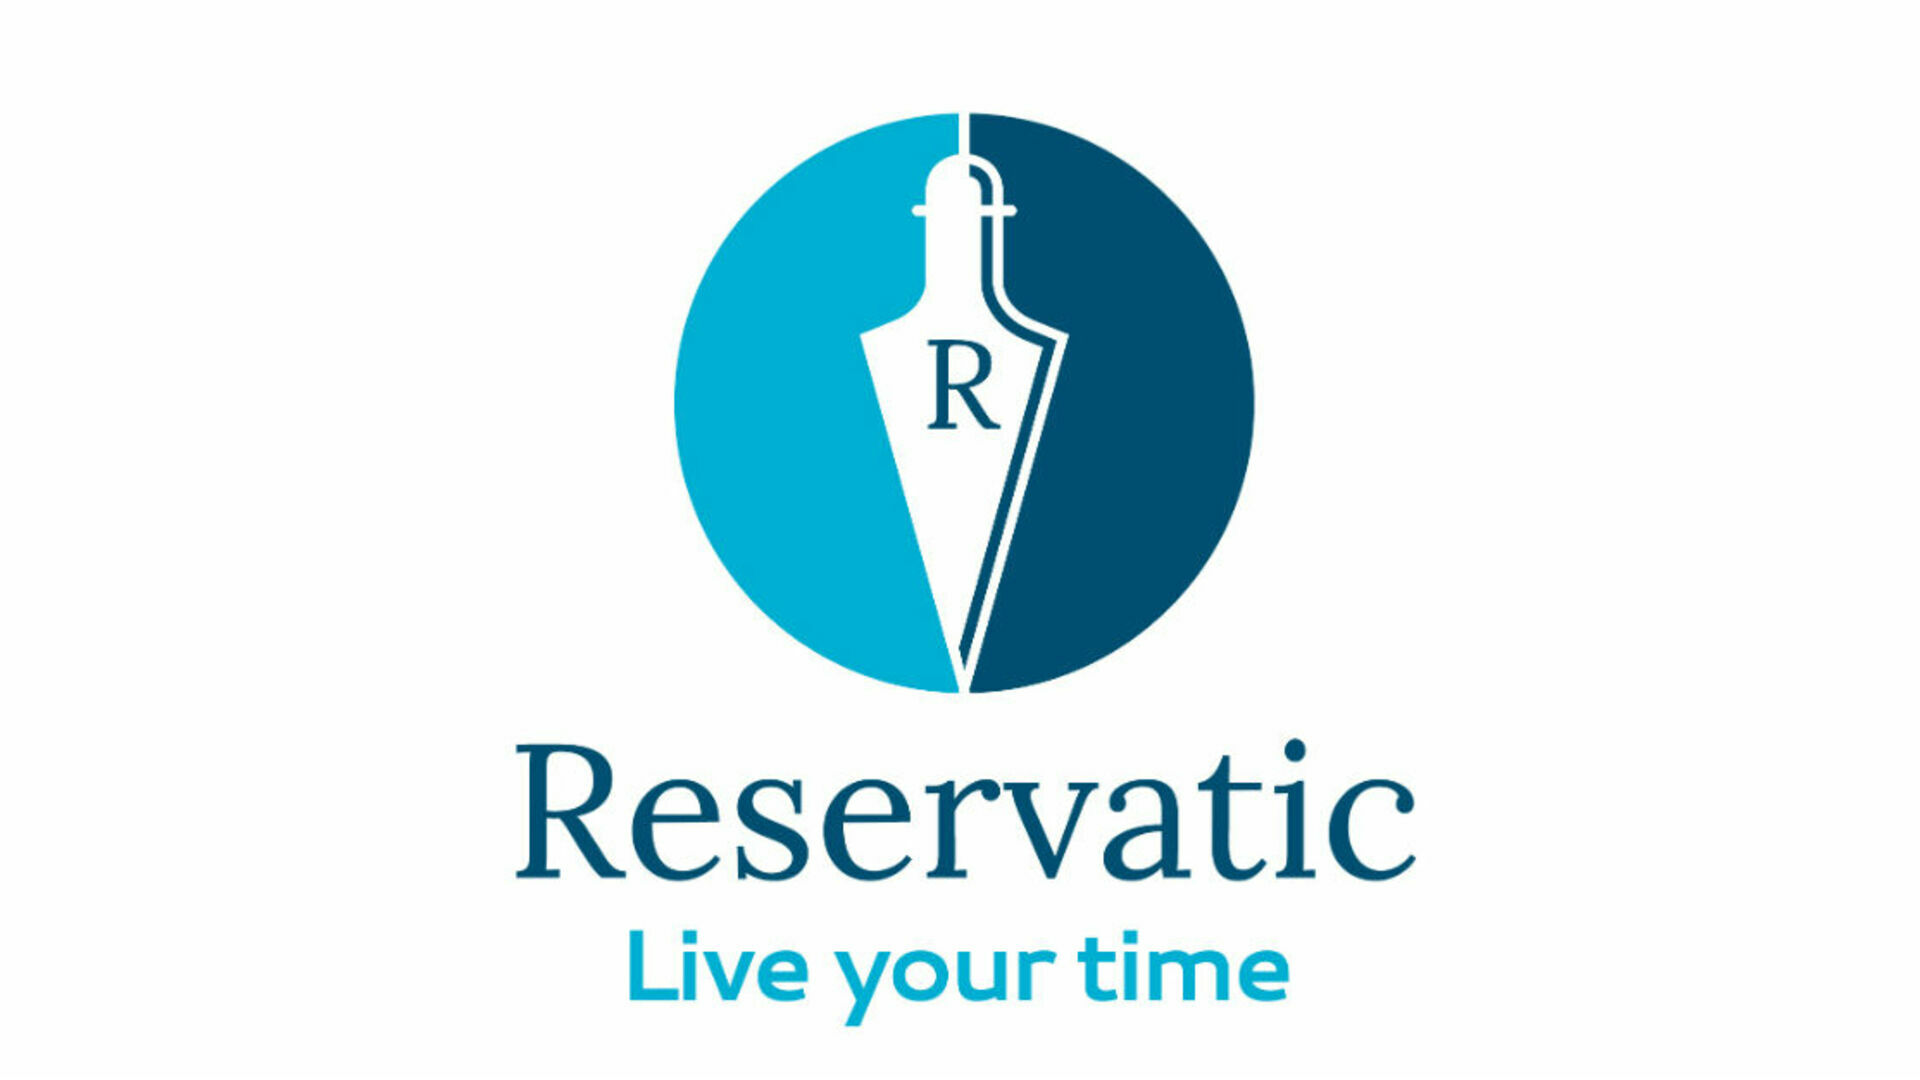 Where can Reservatic be used everywhere?